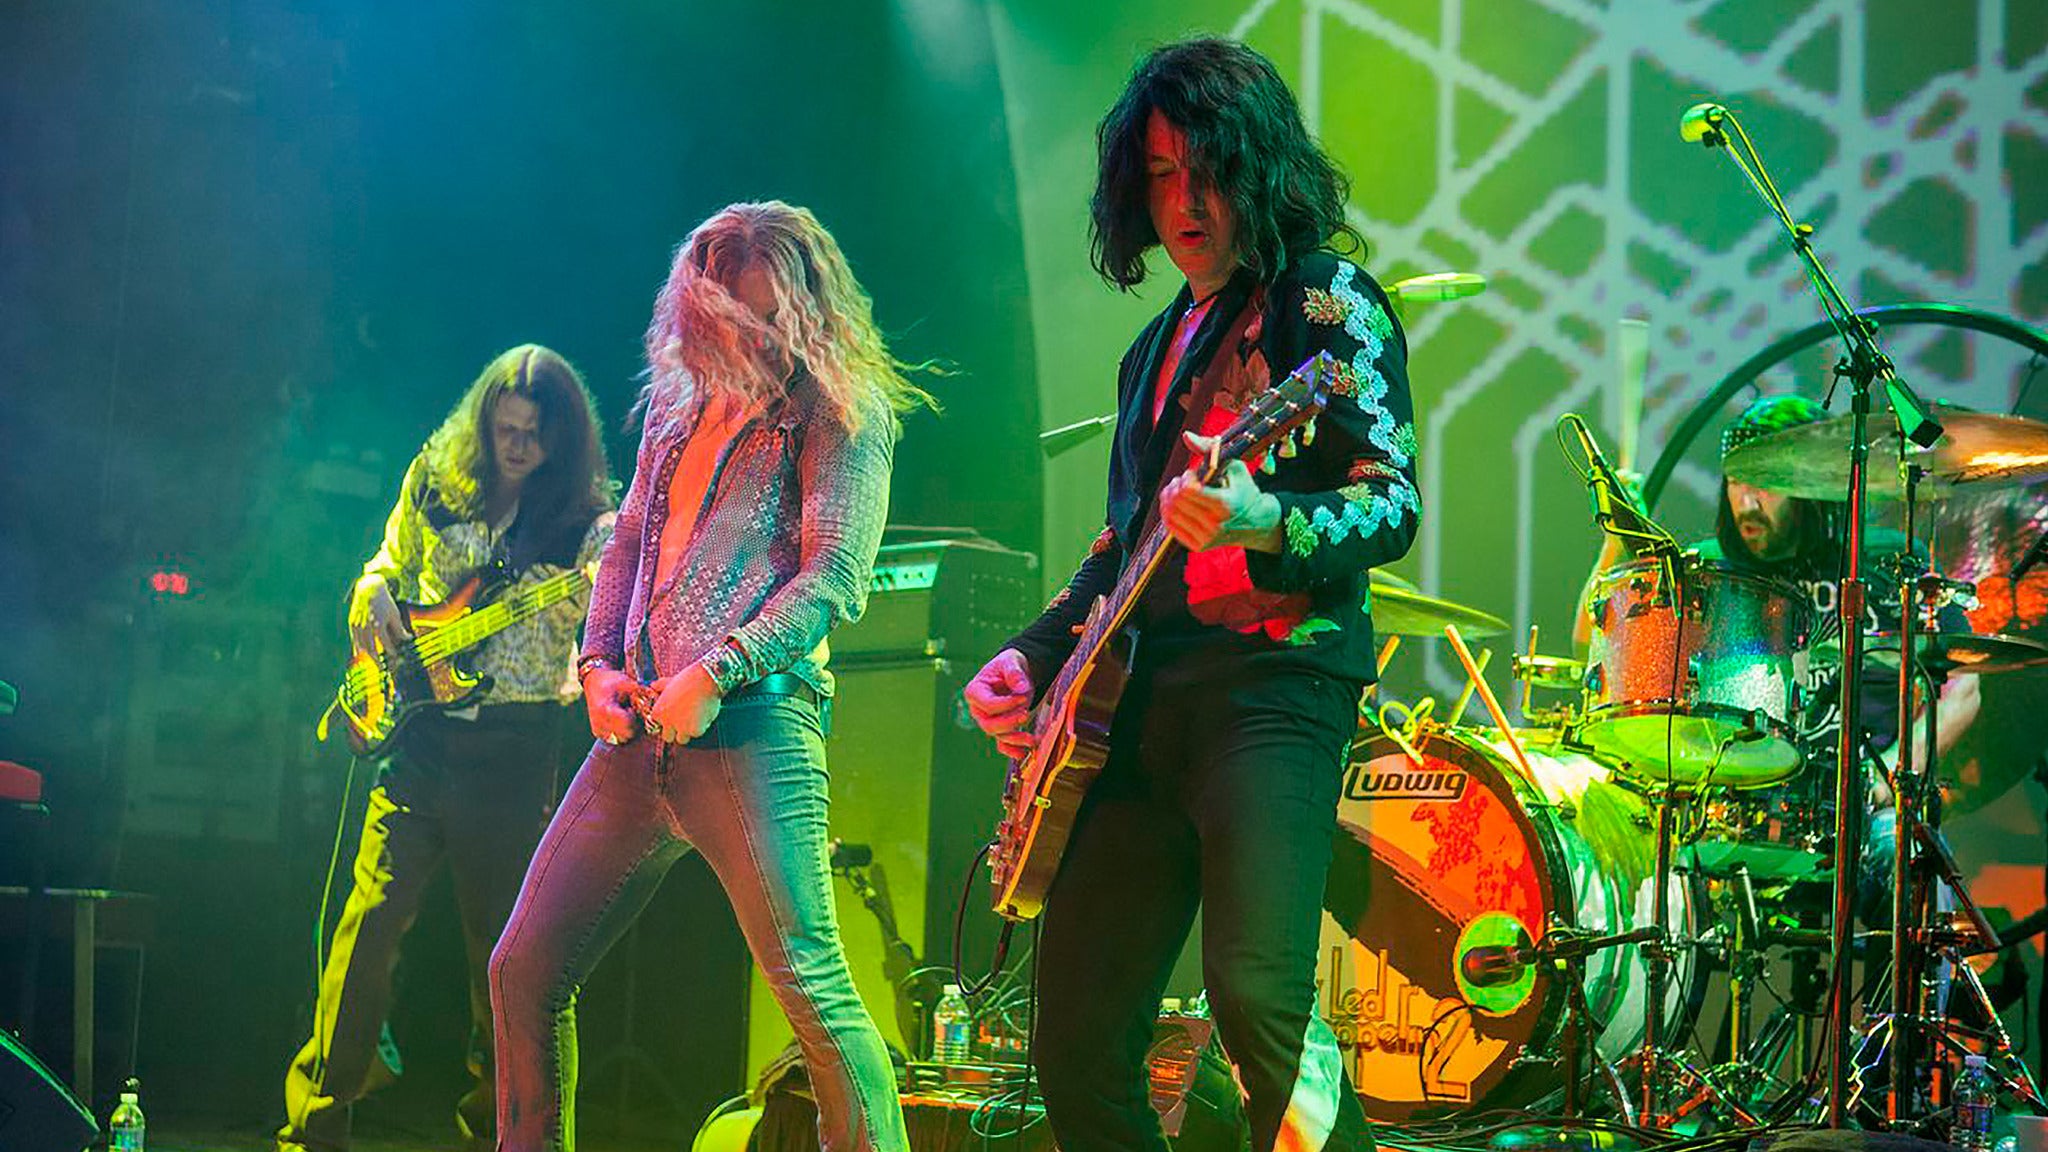 Image used with permission from Ticketmaster | Led Zeppelin 2 tickets